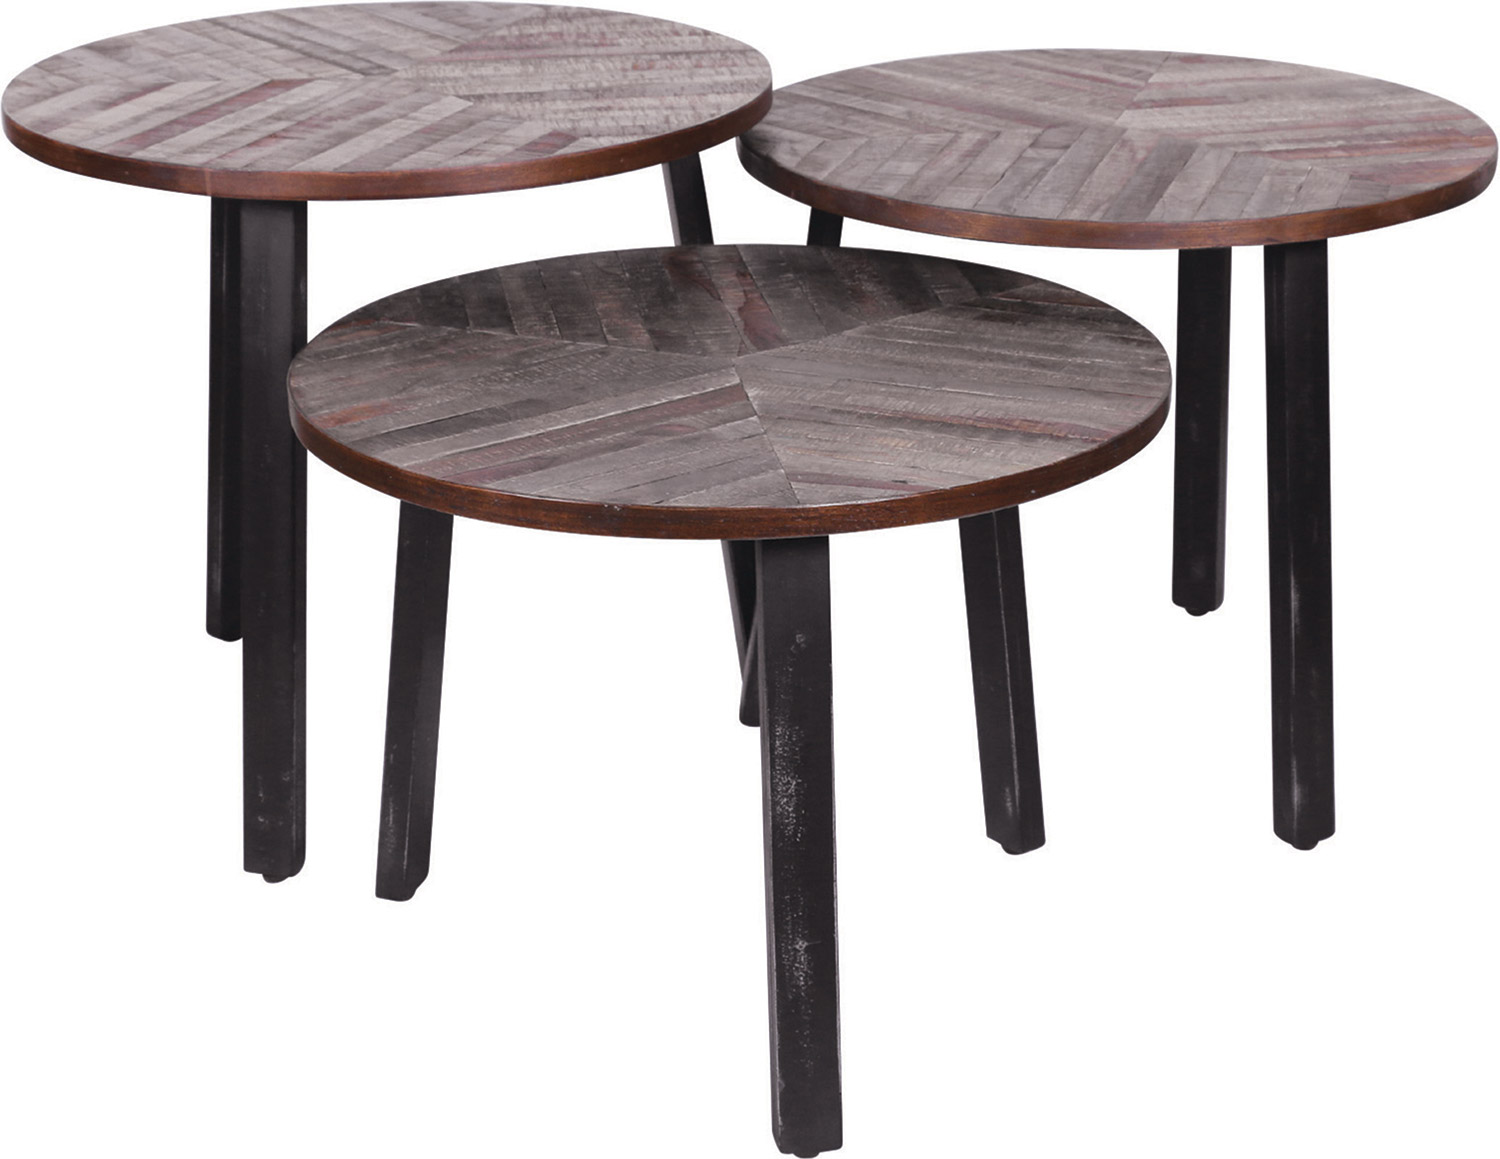 Ren-Wil Three Leaves Accent Table - Weathered